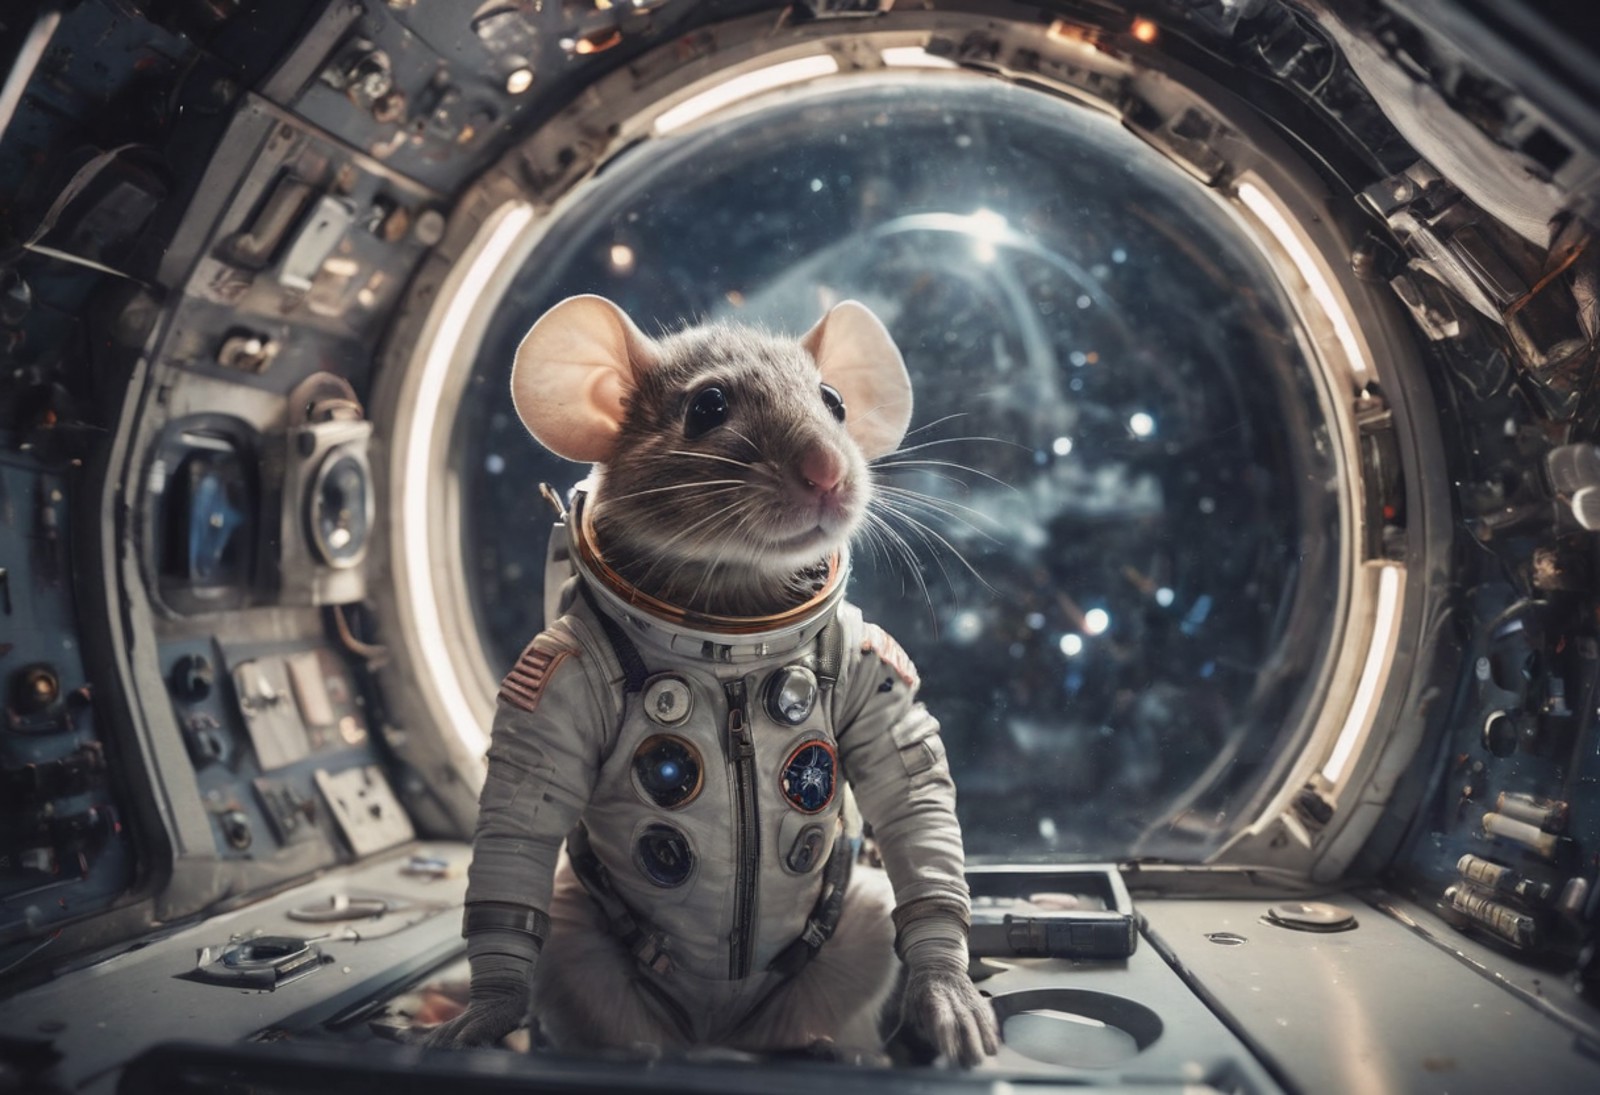 A captivating photograph featuring an astronaut mouse aboard a futuristic spaceship, evoking the wonder of space explorati...